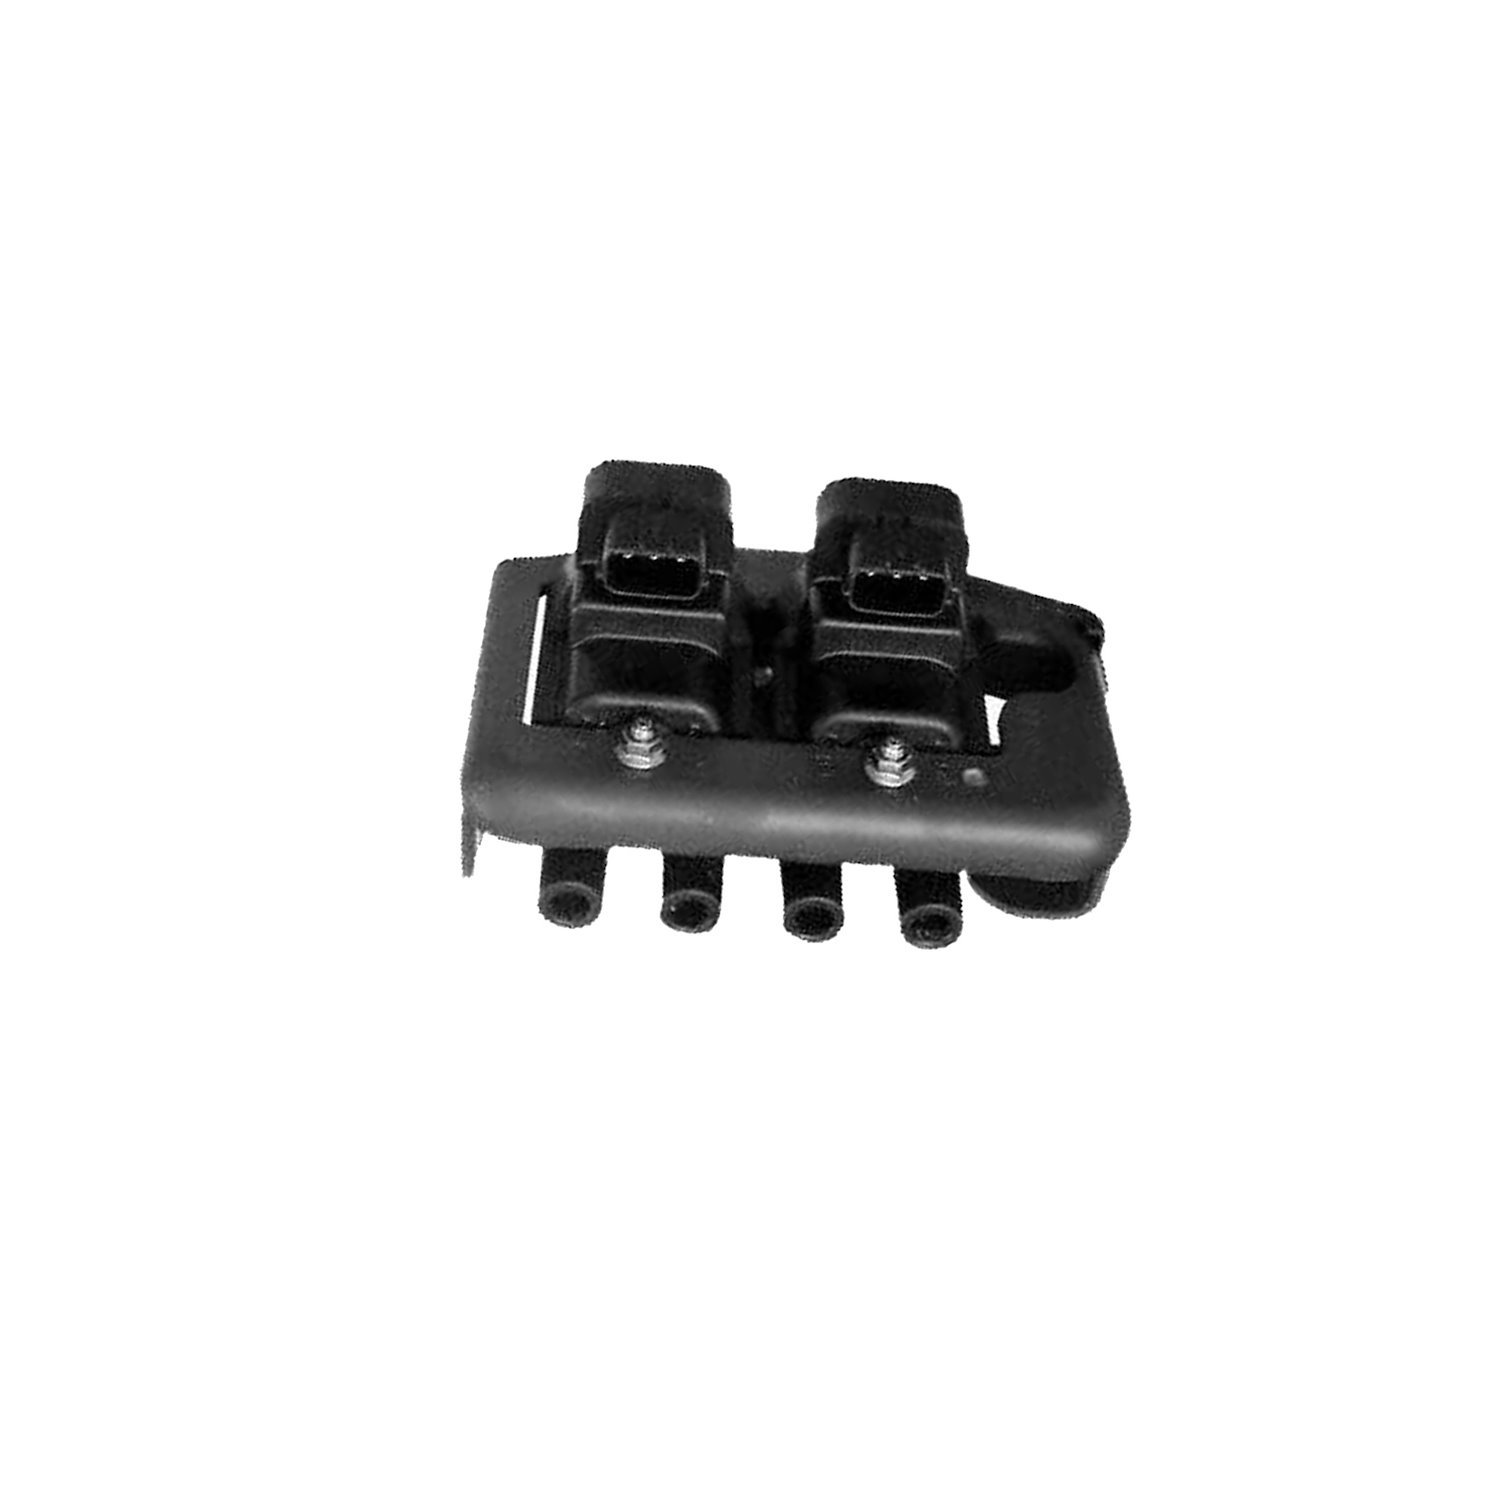 OE Replacement Ignition Coil for Mazda Protege Ford